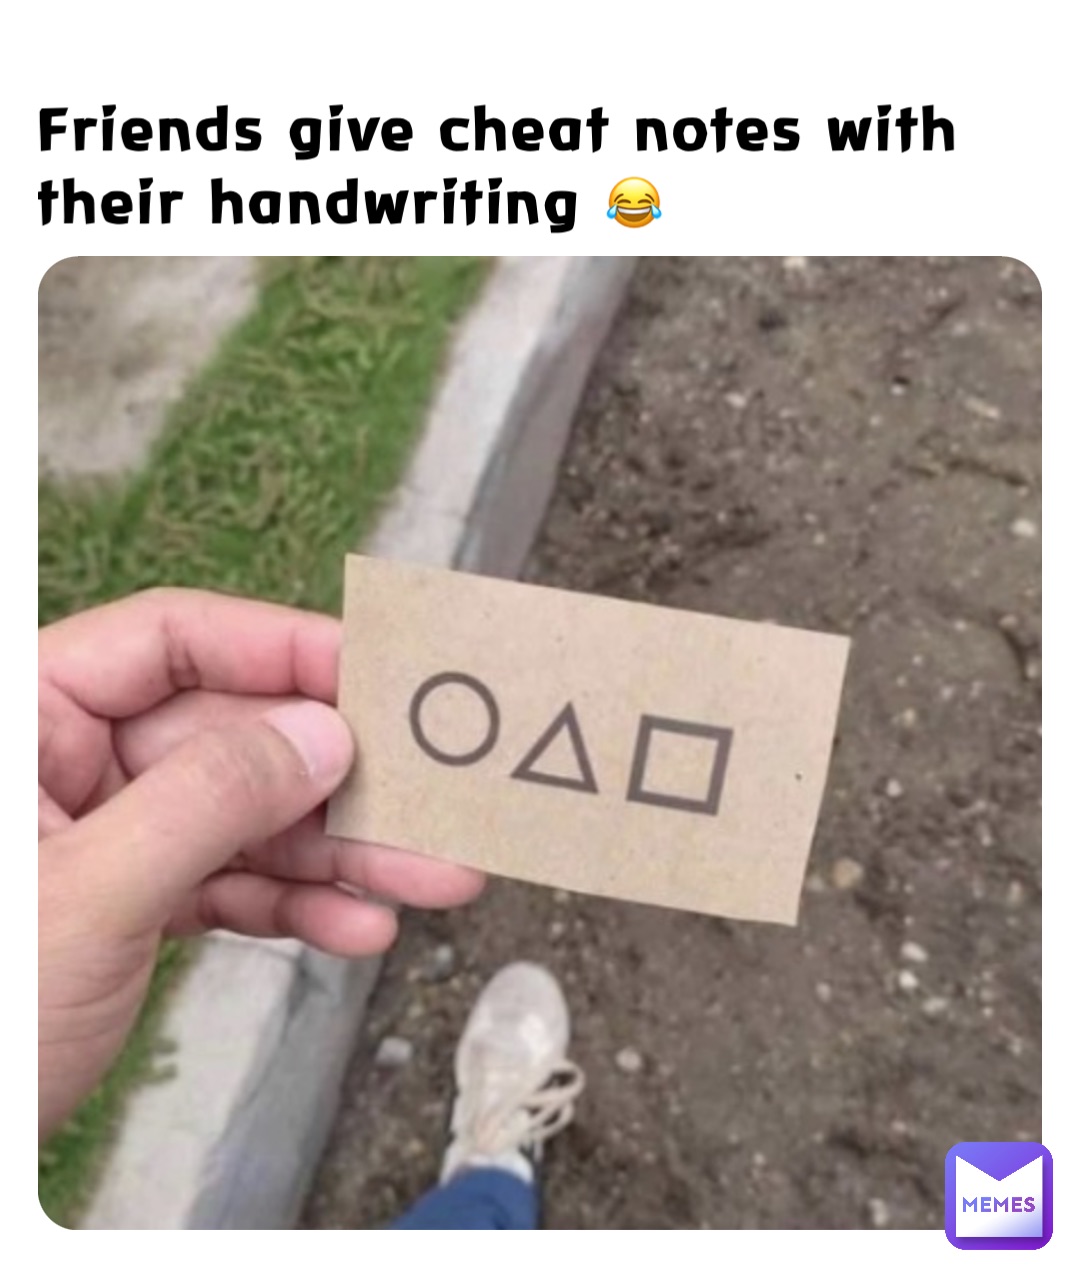 Friends give cheat notes with their handwriting 😂